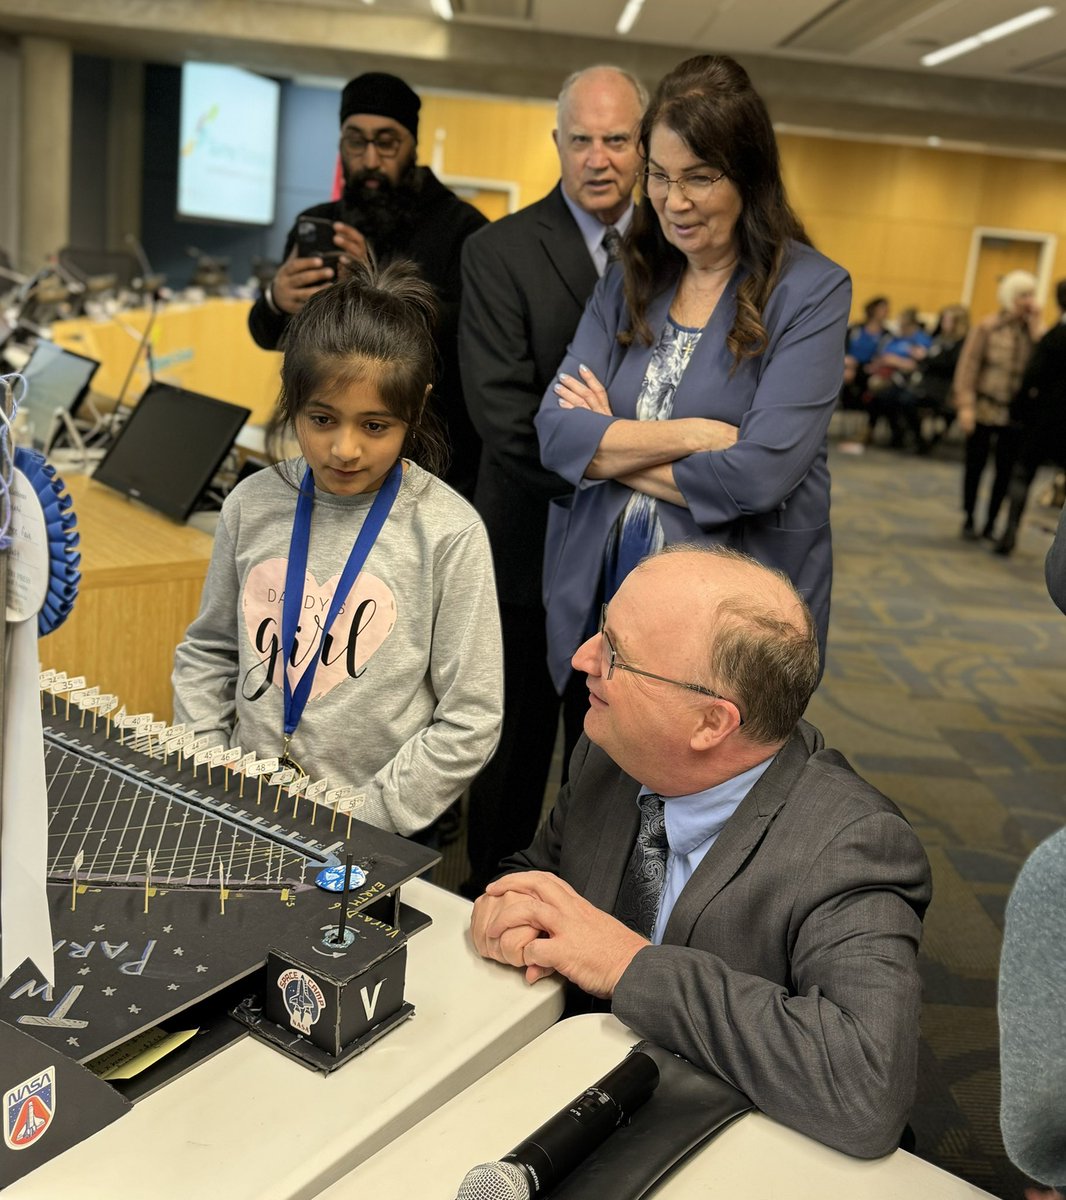 Thank you to 3 students who showed their award winning science fair projects to trustees at the Surrey Board of Education meeting! Veira Bhandari, a Grade 4 from Sullivan Elementary, explained her project on Time Dilation…   1/2

#sd36learn #SurreyBC #WhiteRockBC